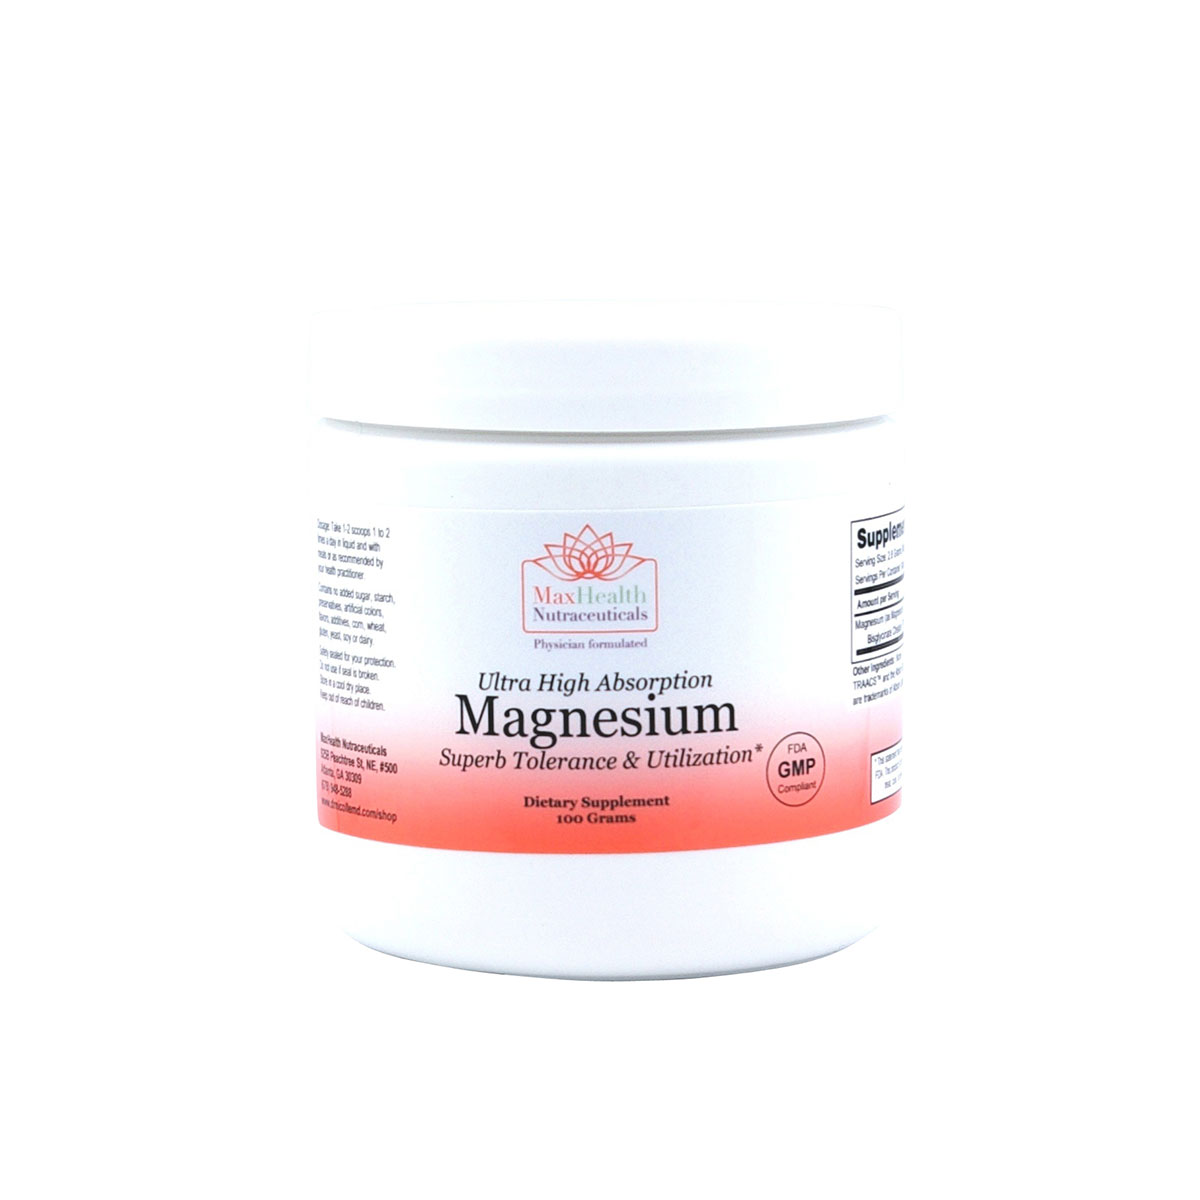 11Ultra High Absorption Magnesium 100grams